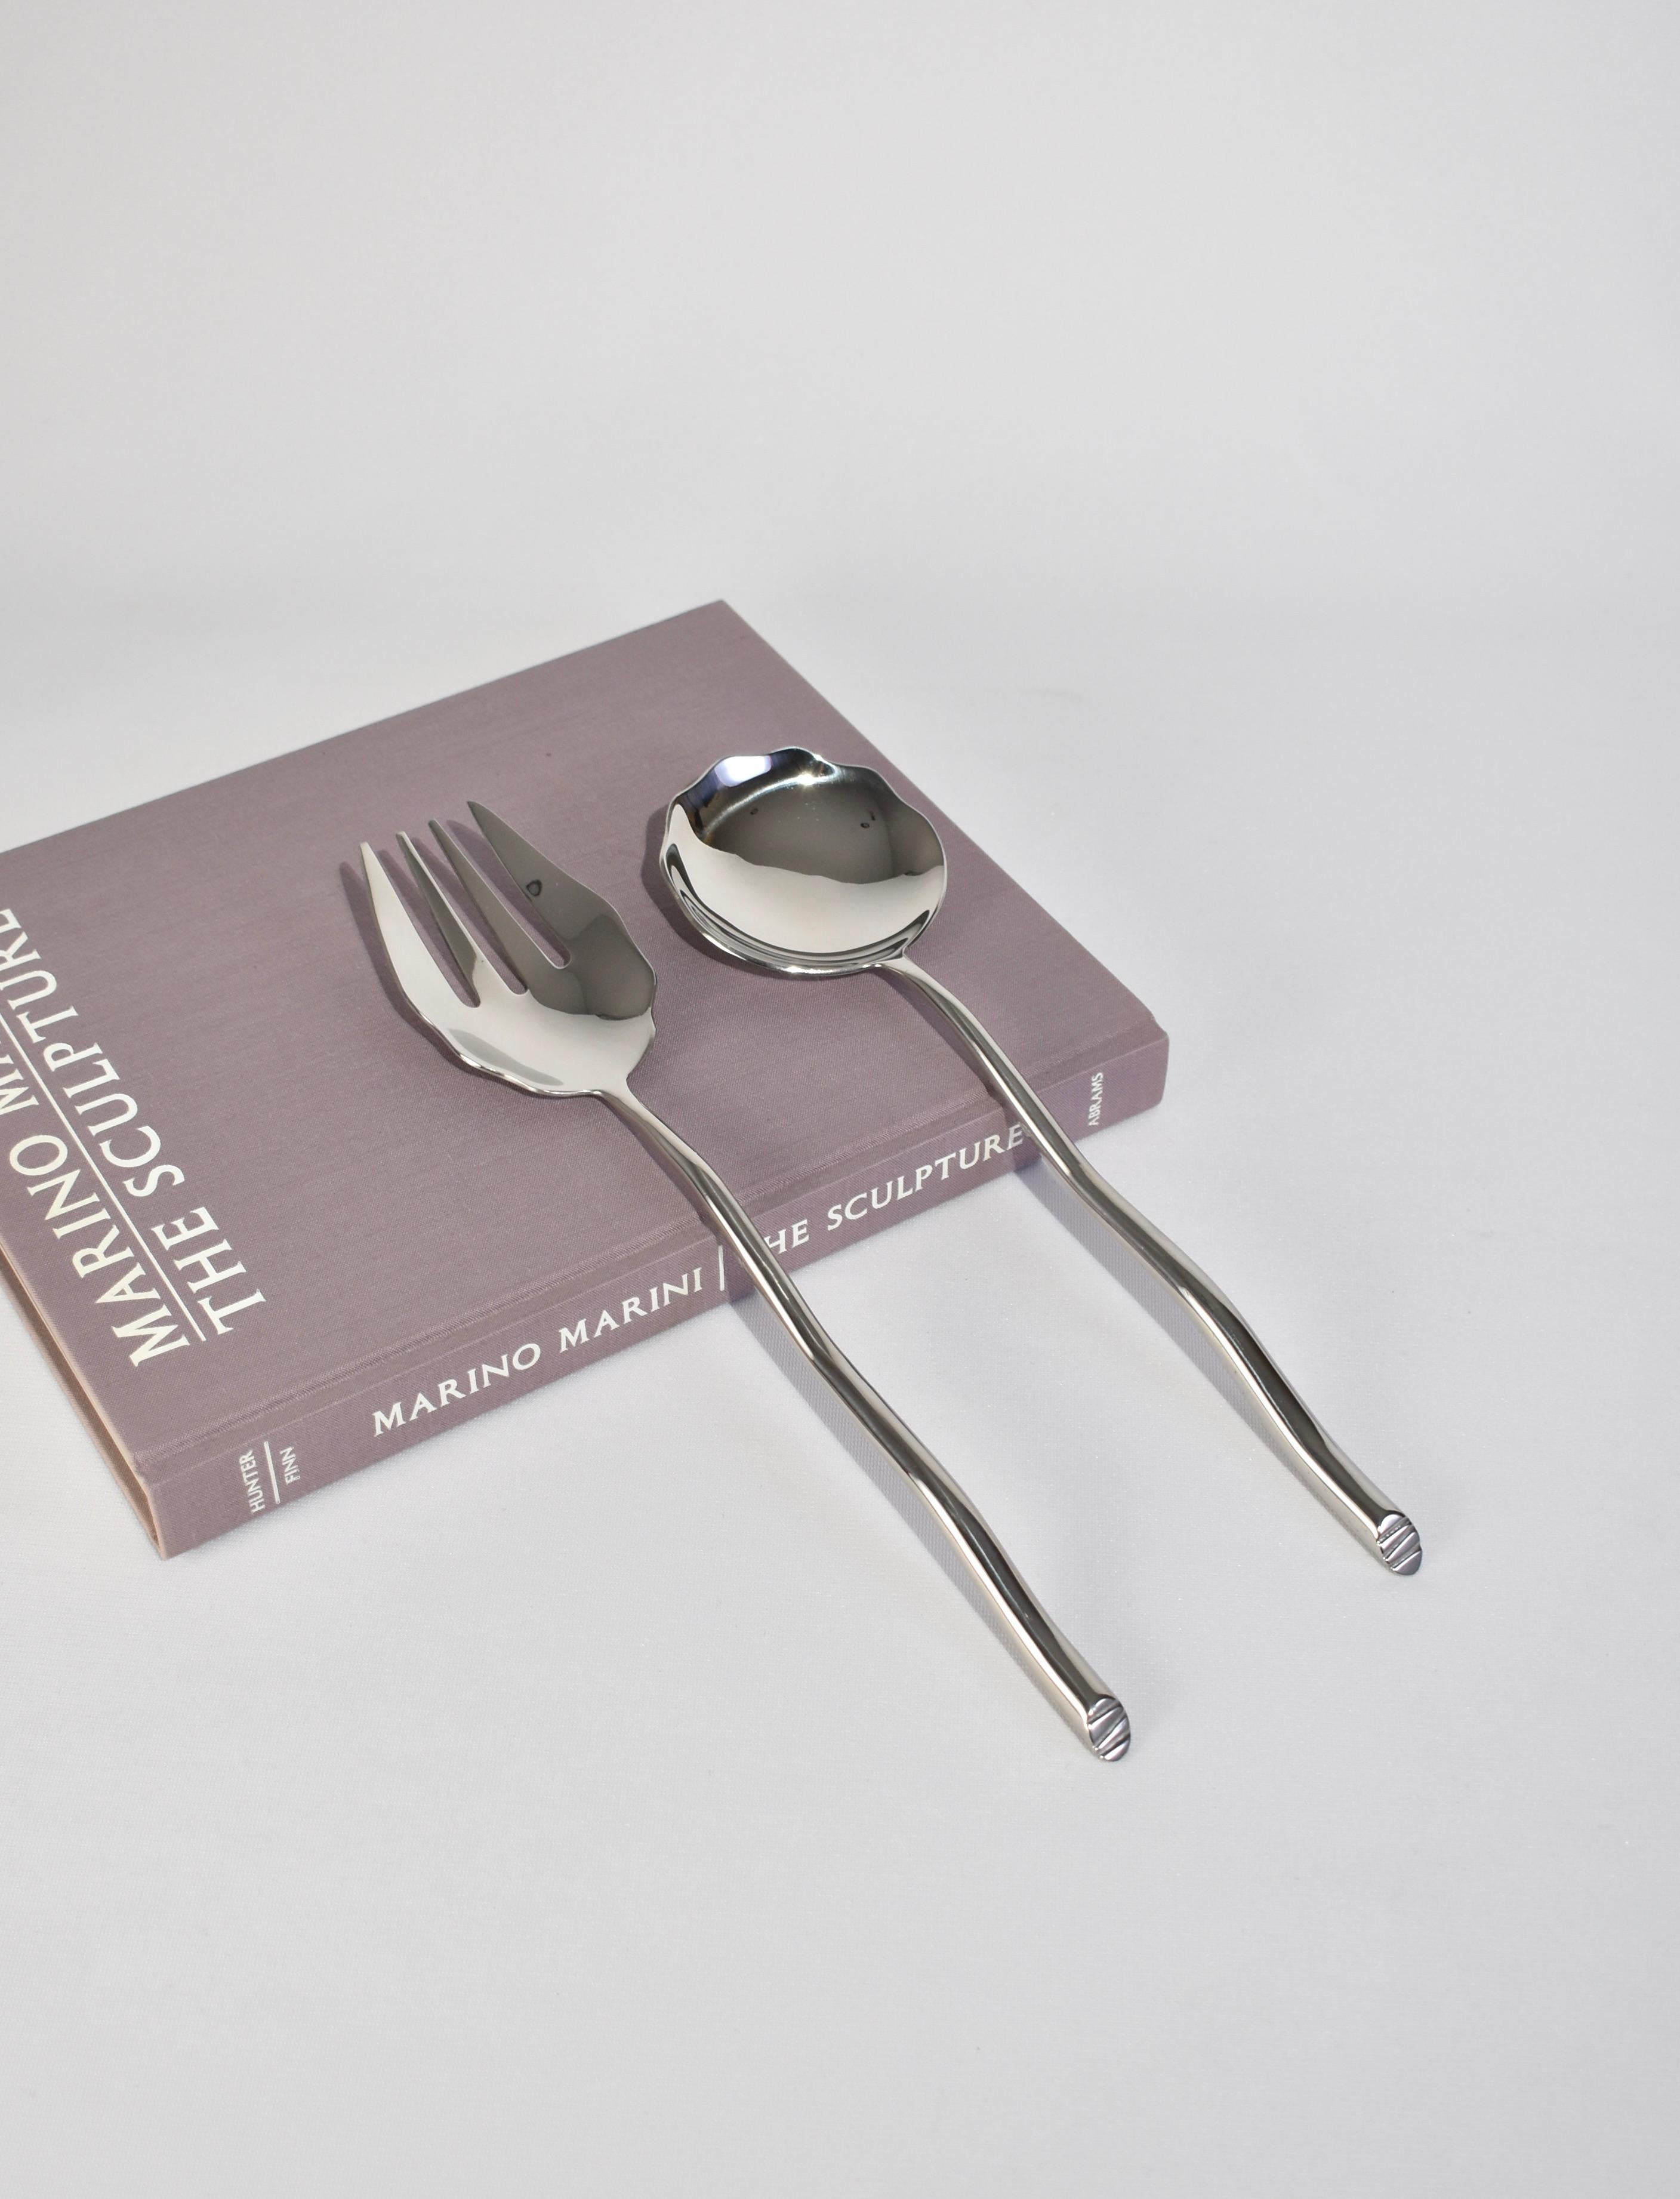 Sculptural, large stainless steel salad serving set in the 'Shore pattern'. Each piece features an undulating handle with an angled end. Impressed above end on handle: 'IZABEL LAM'. 

Designed in the late 1980s by Izabel Lam

Dimensions: